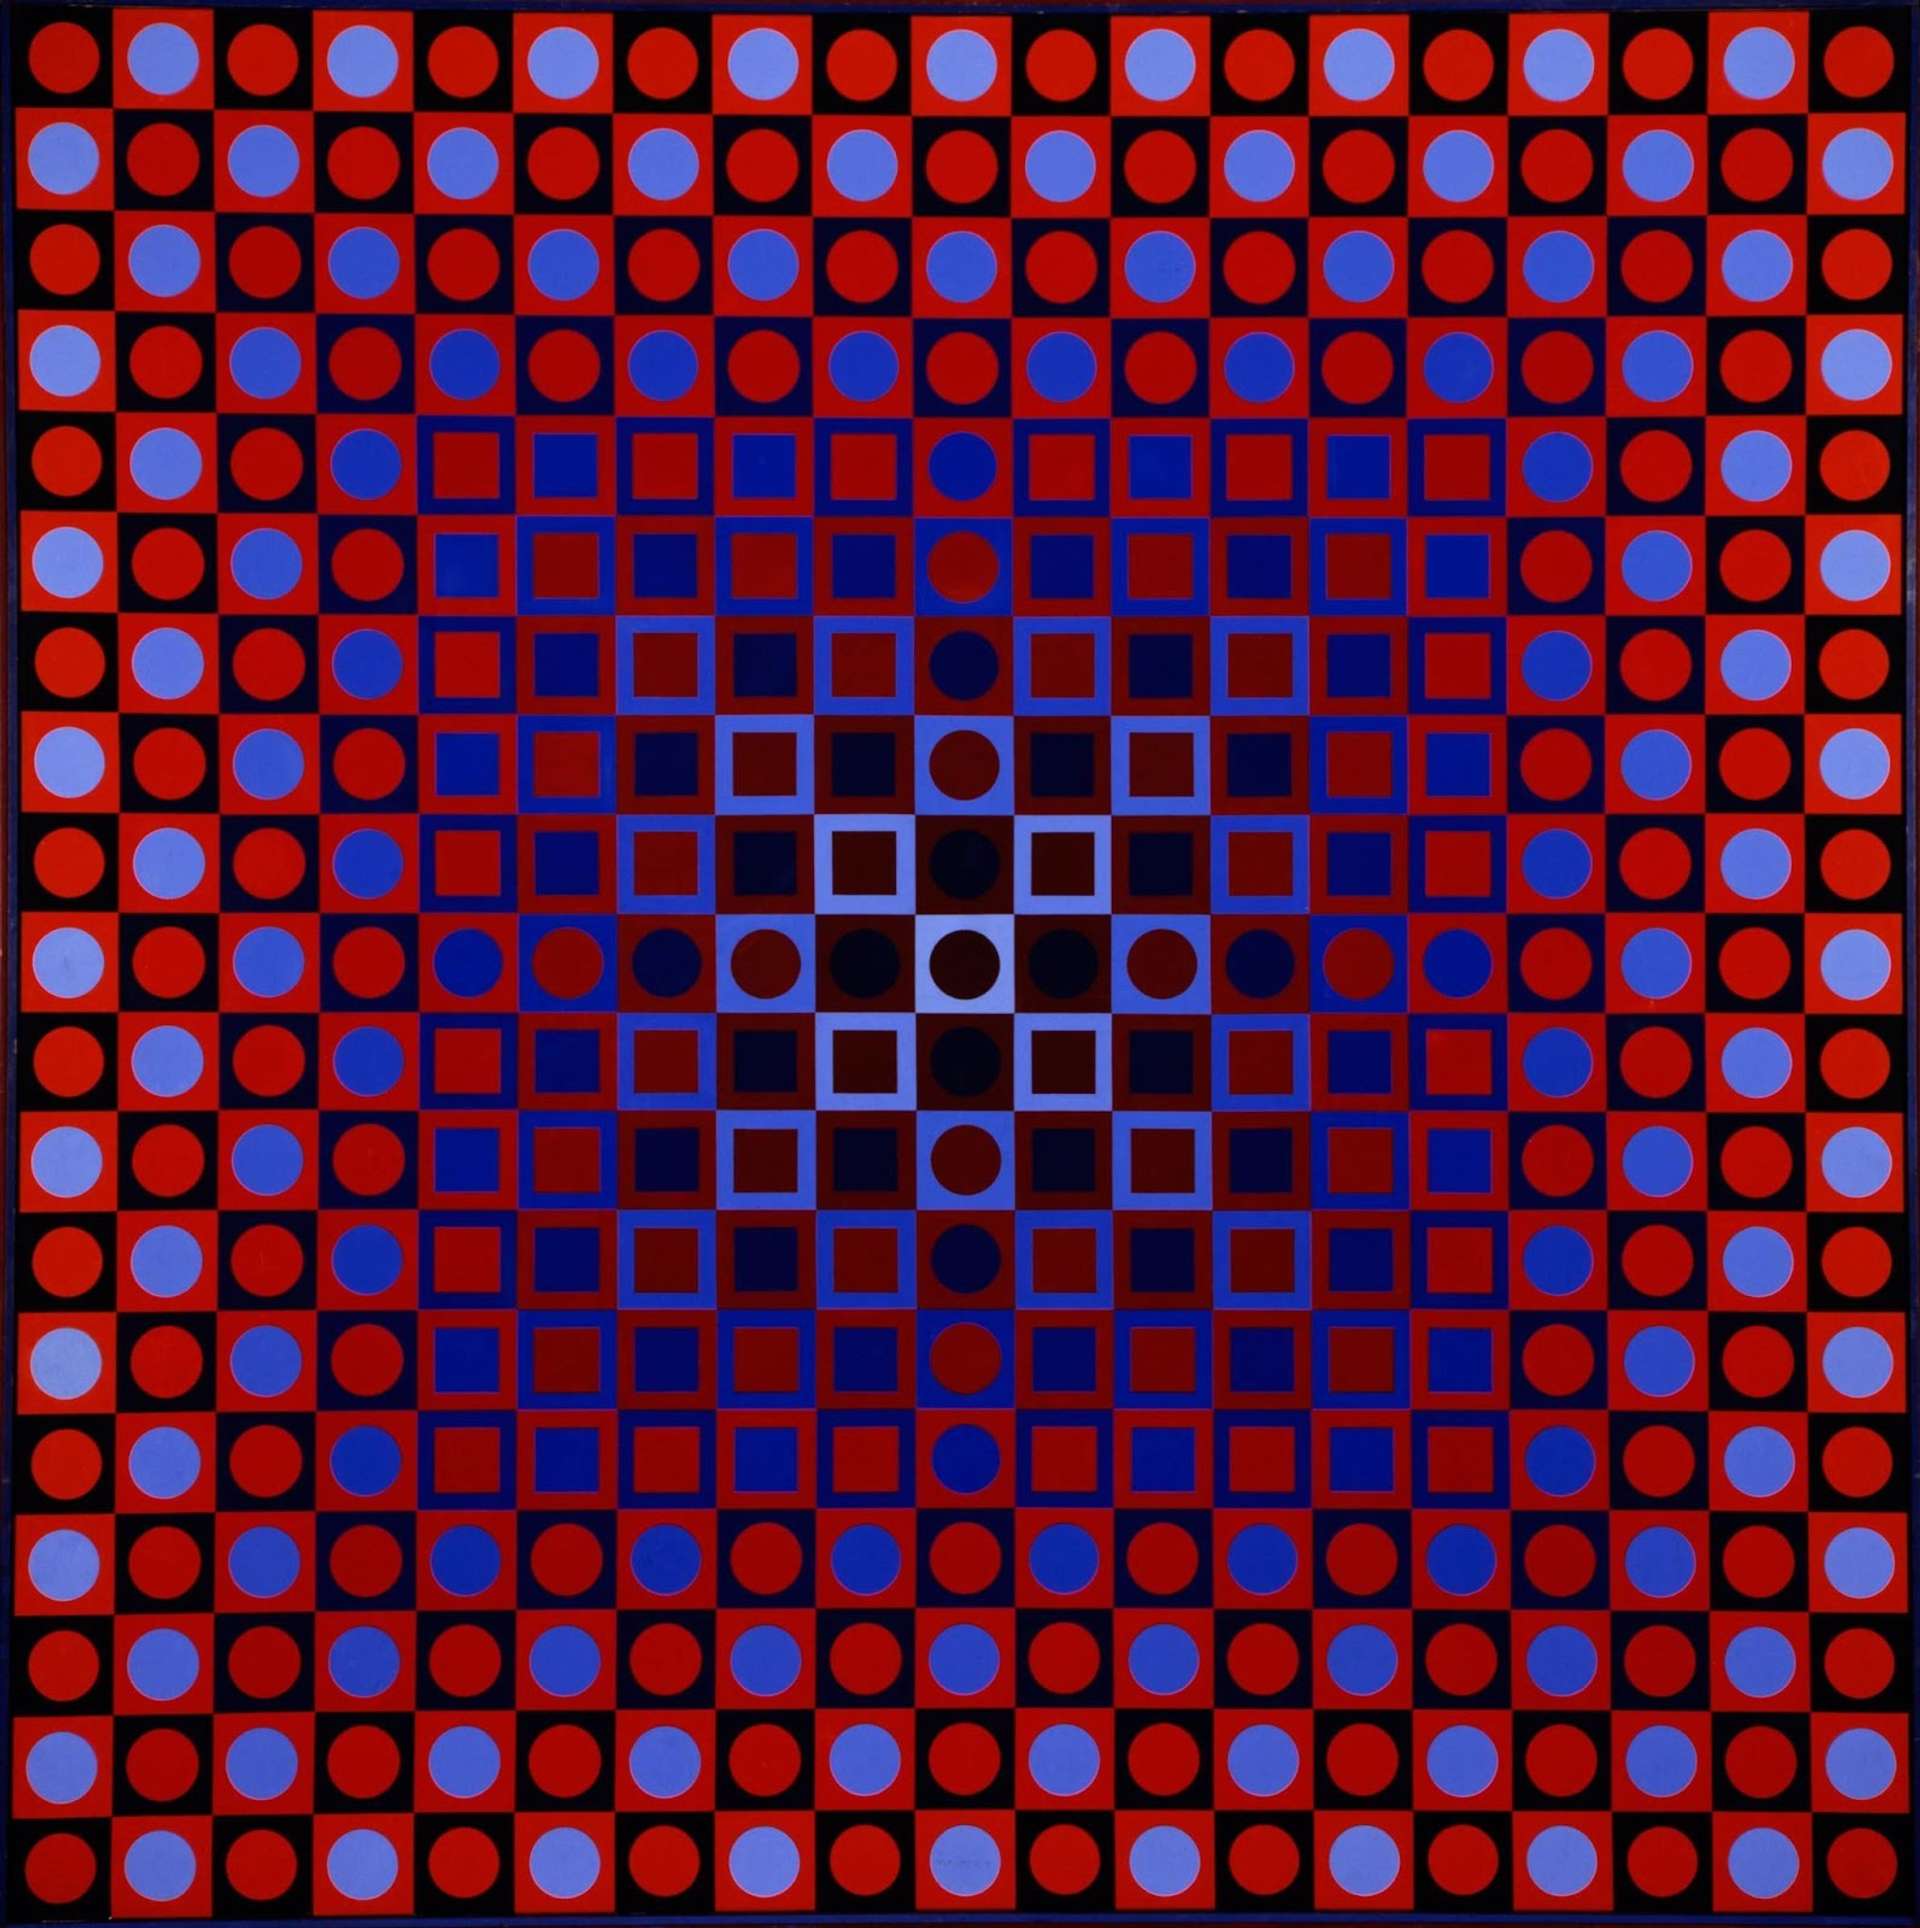 A work composed of red, blue, and purple hues that bleed into each other to create an op art work featuring a repeating pattern of small squares and circles that creates an in-and-out visual effect.